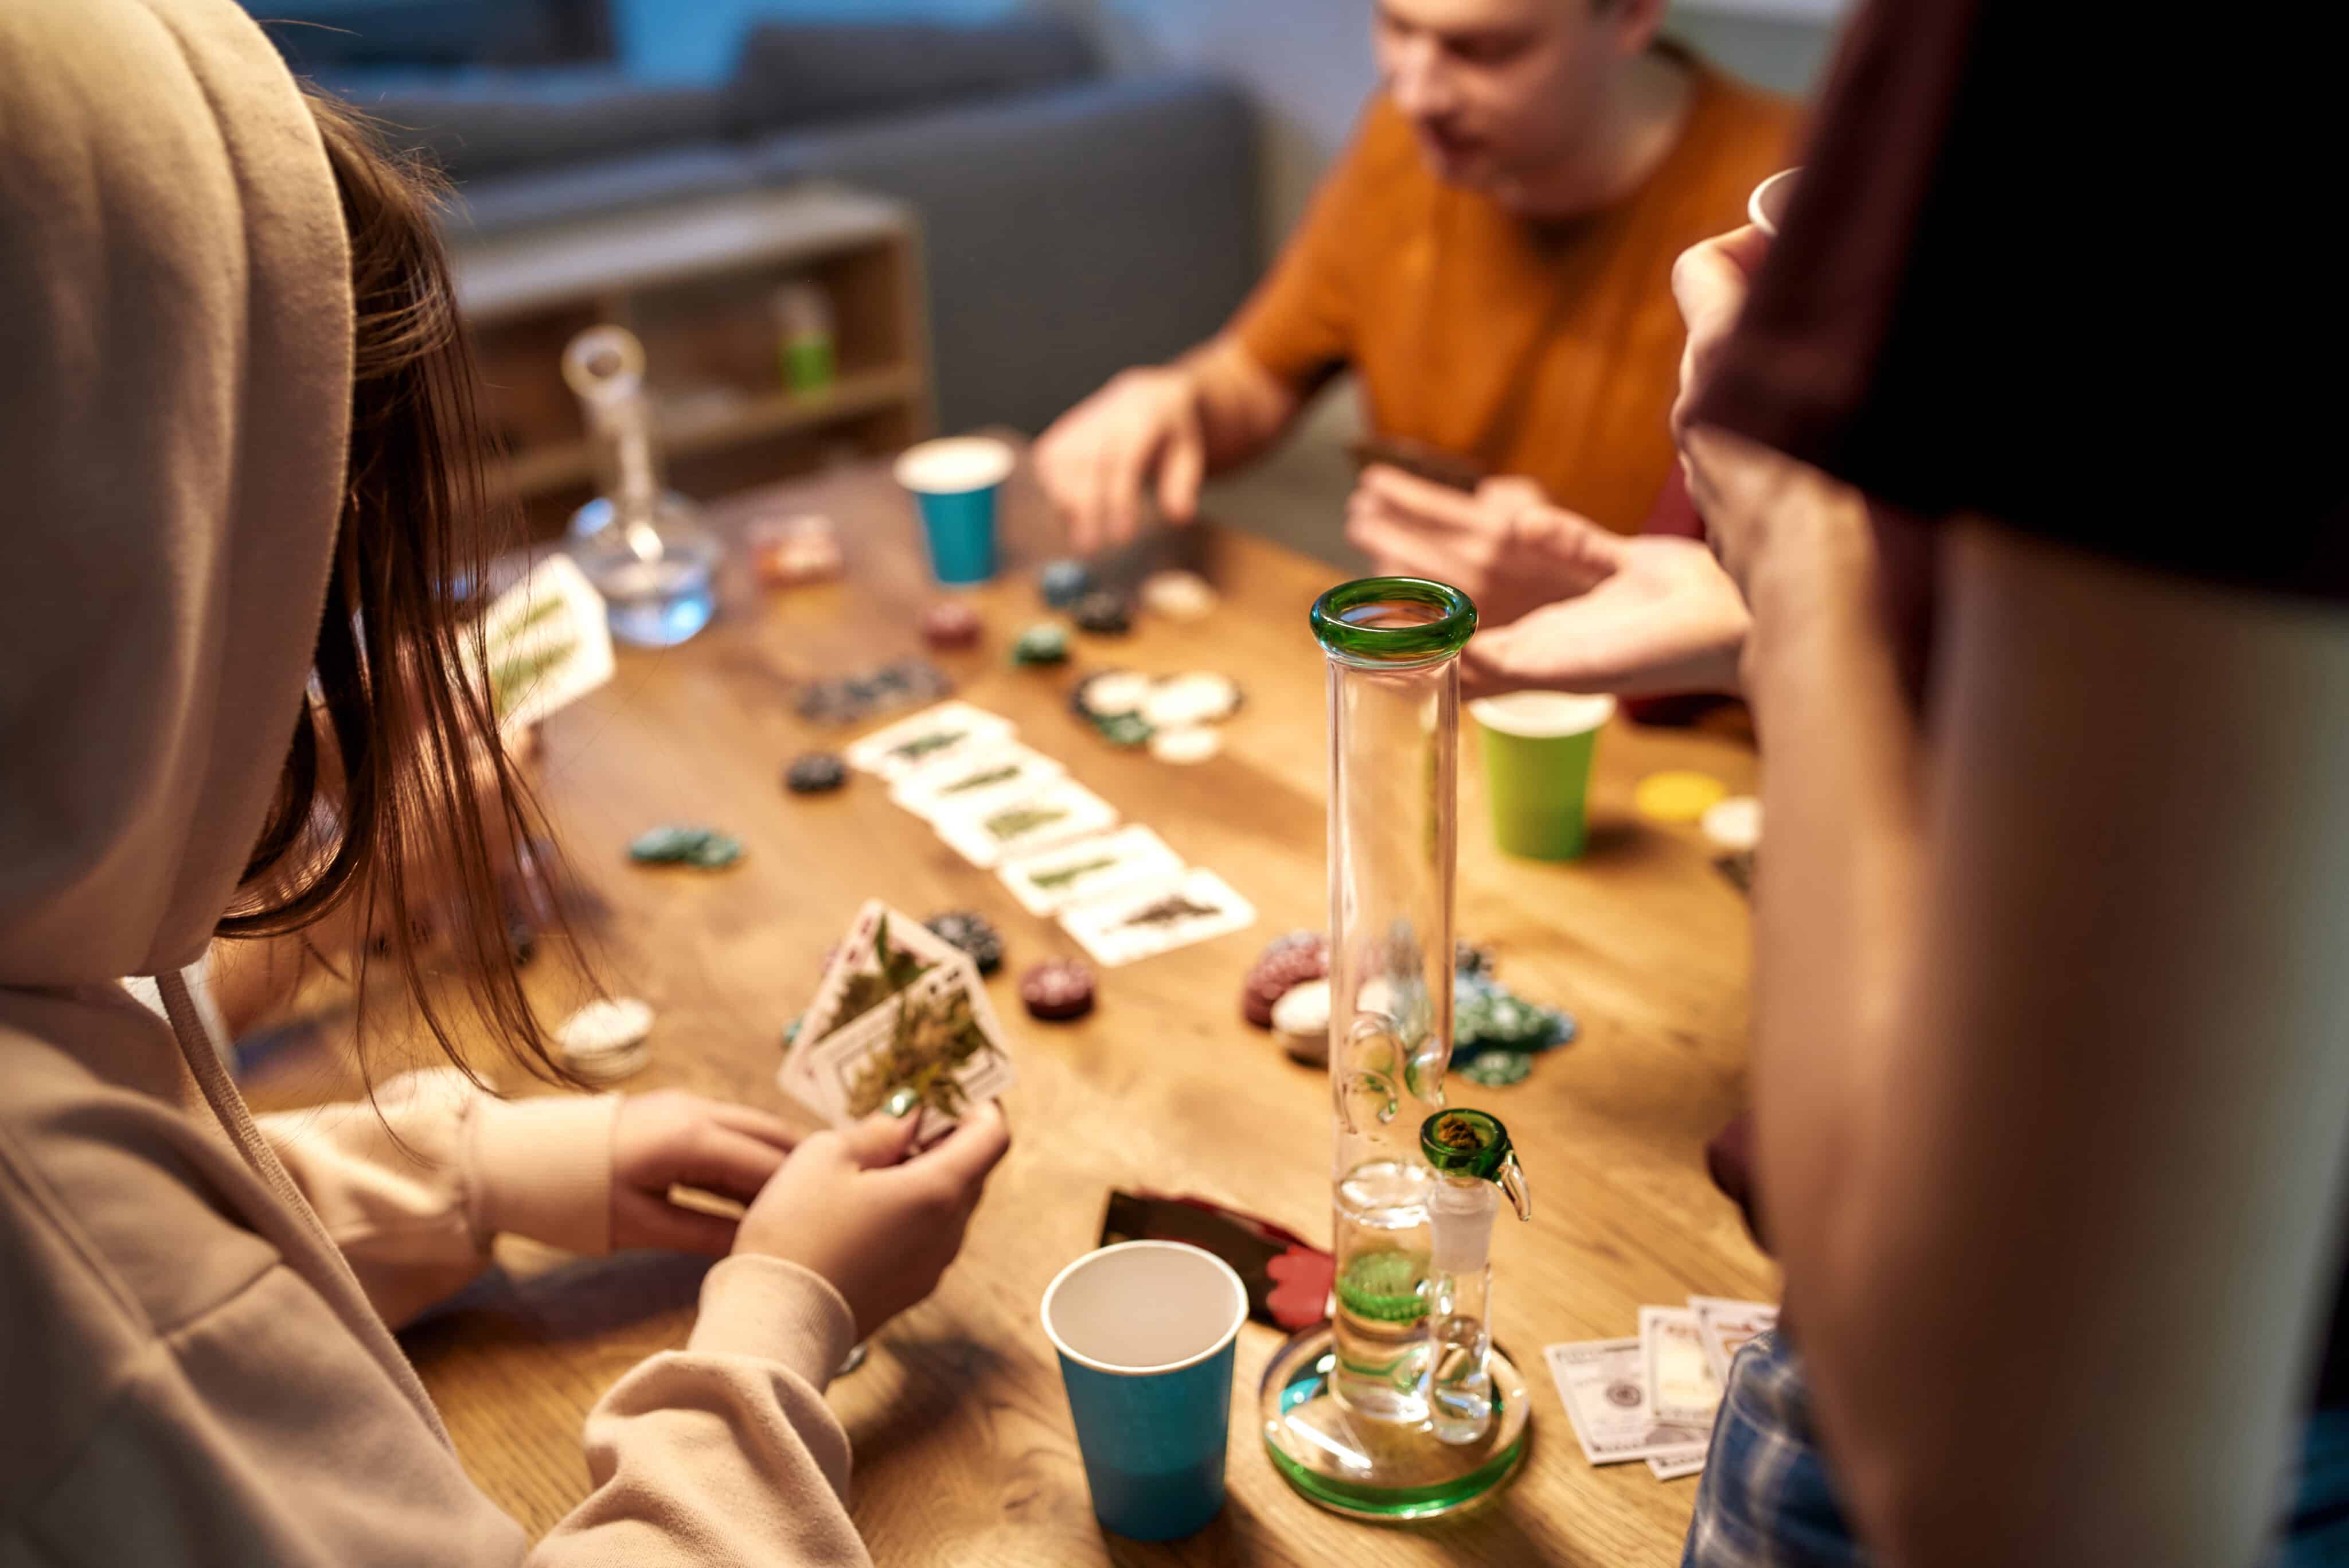 Rhode Island Bill Attempts To Prevent Cannabis Gatherings of More Than Three People